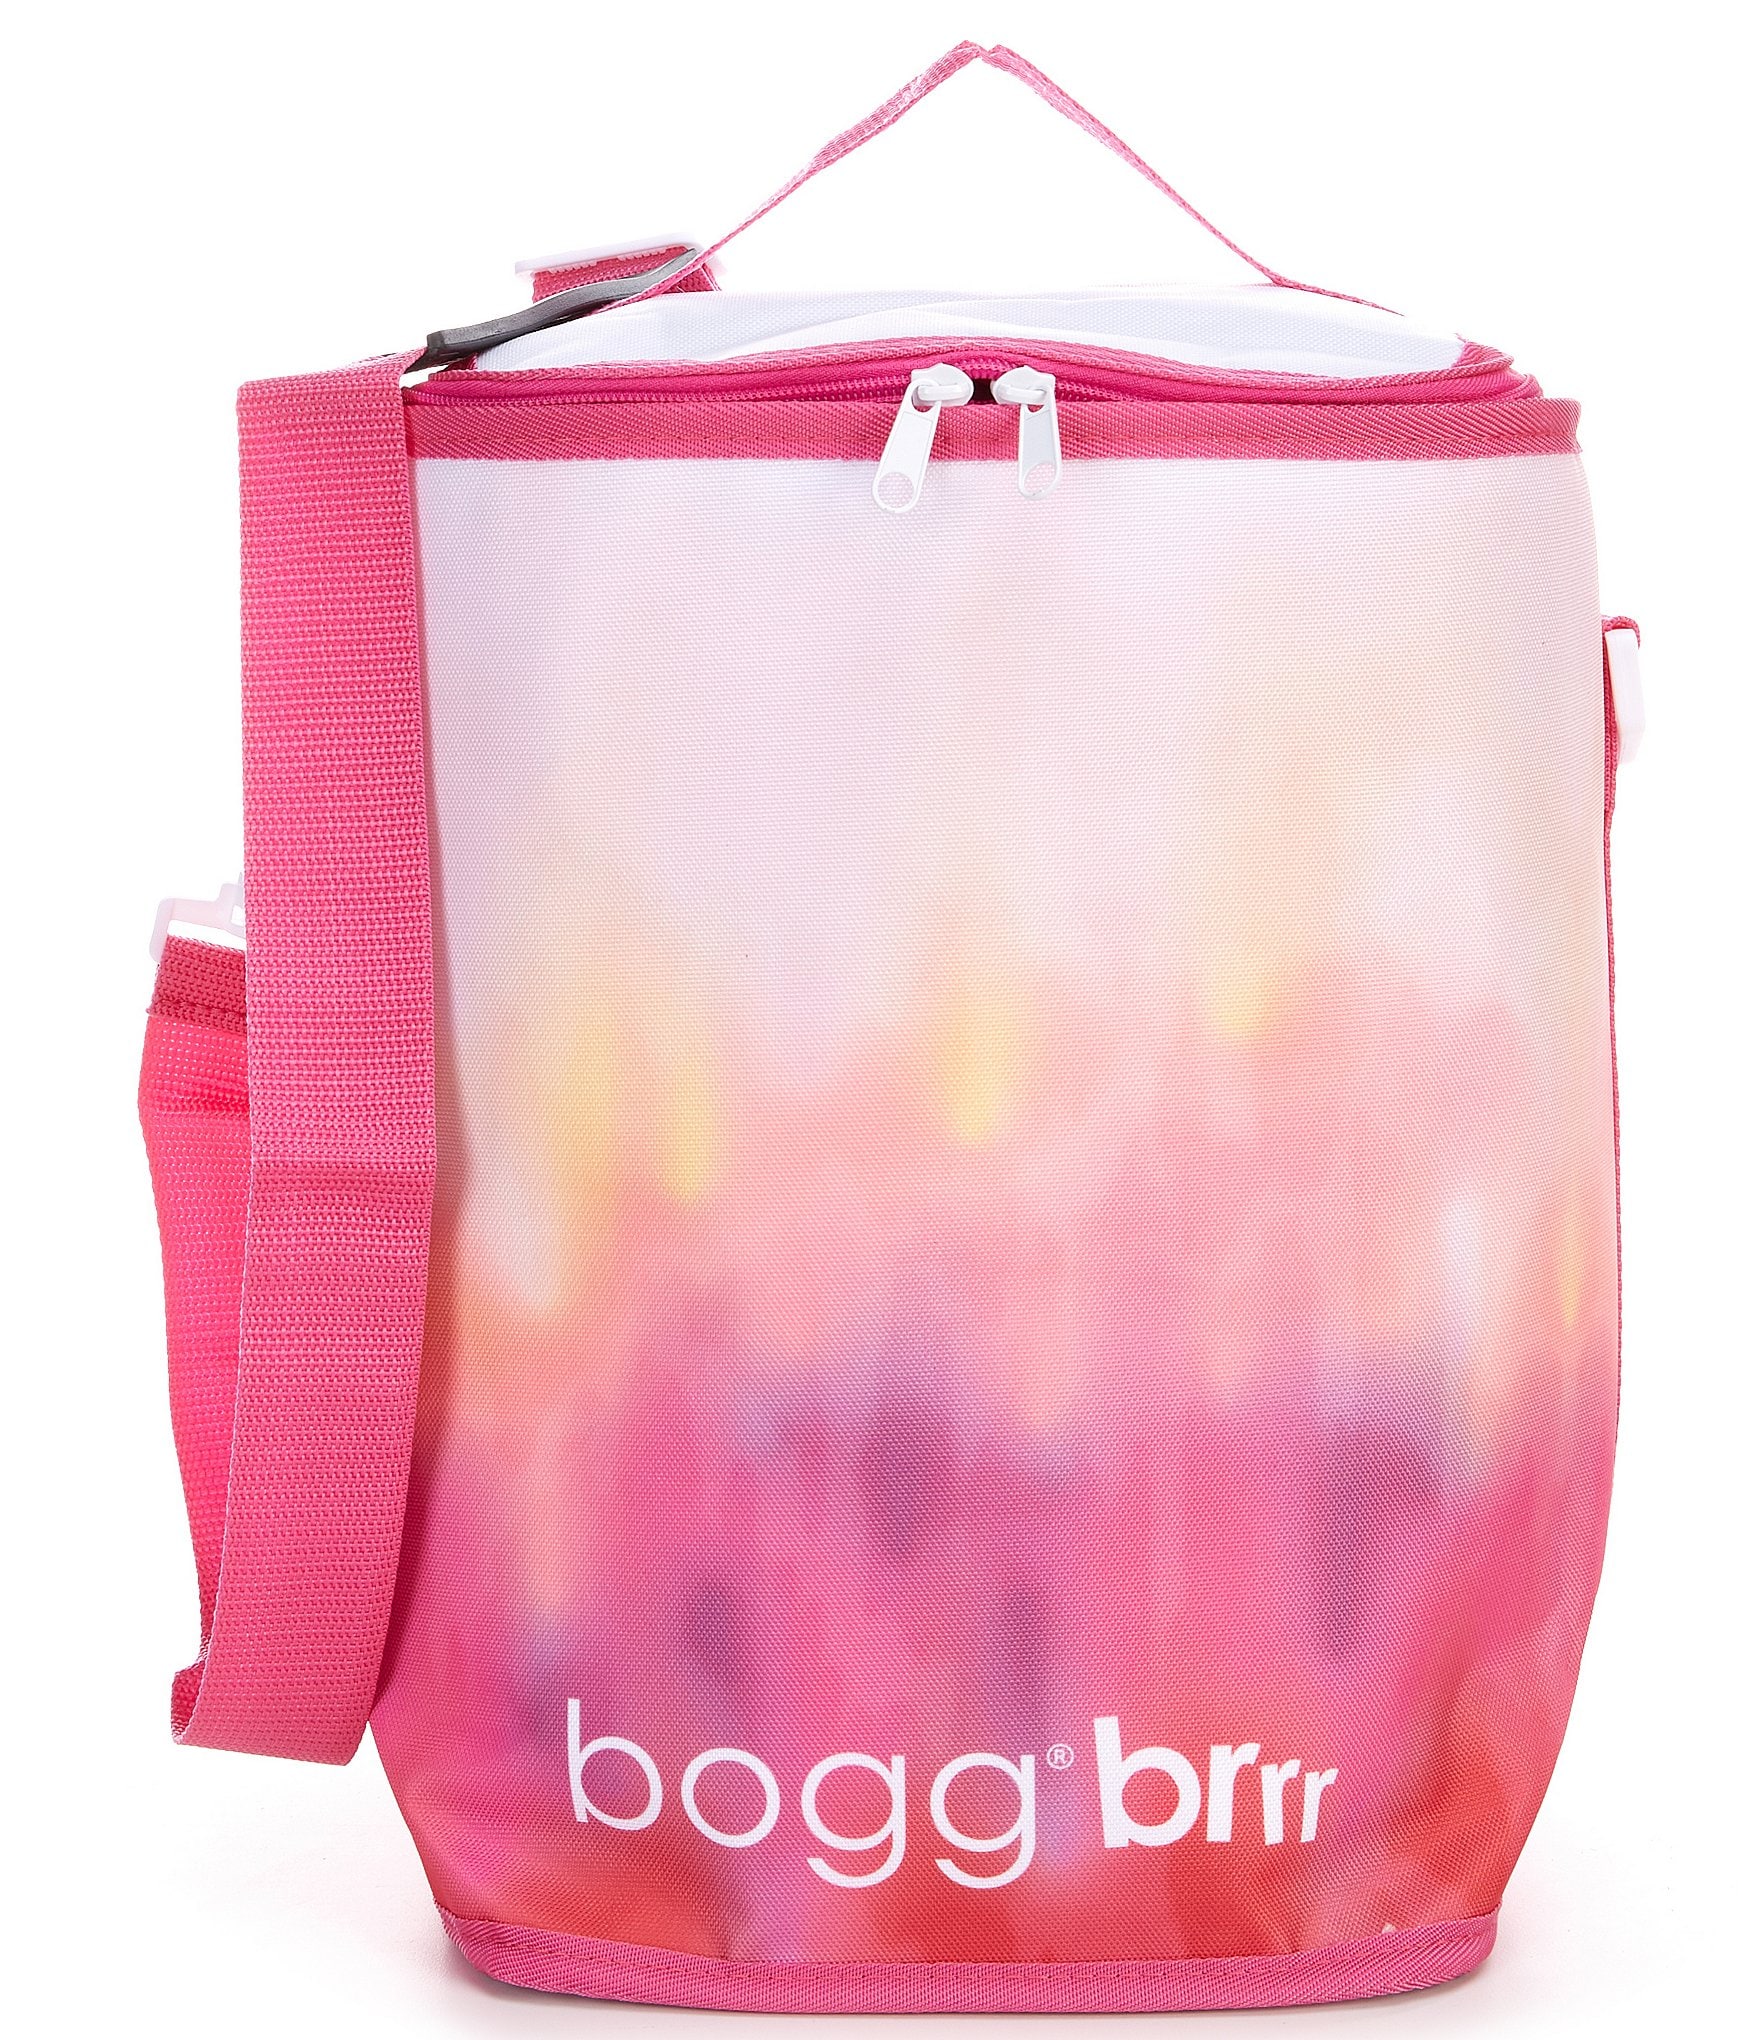 Baby Bogg Brrr Cooler insert for small Bogg Bag – Baby Go Round, Inc.